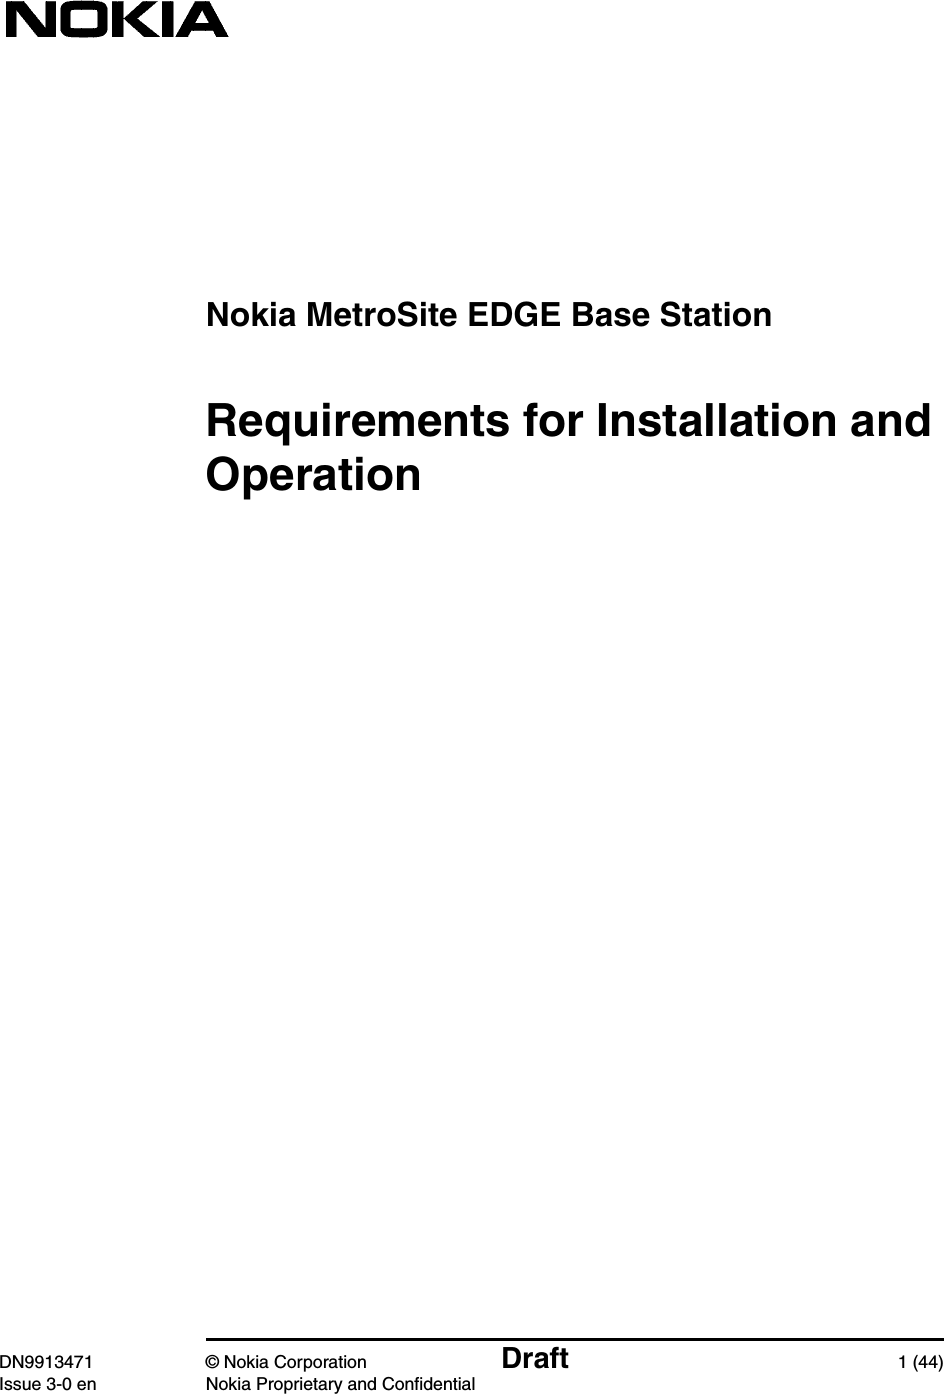 Nokia MetroSite EDGE Base StationDN9913471 © Nokia Corporation Draft 1 (44)Issue 3-0 en Nokia Proprietary and ConfidentialRequirements for Installation andOperation